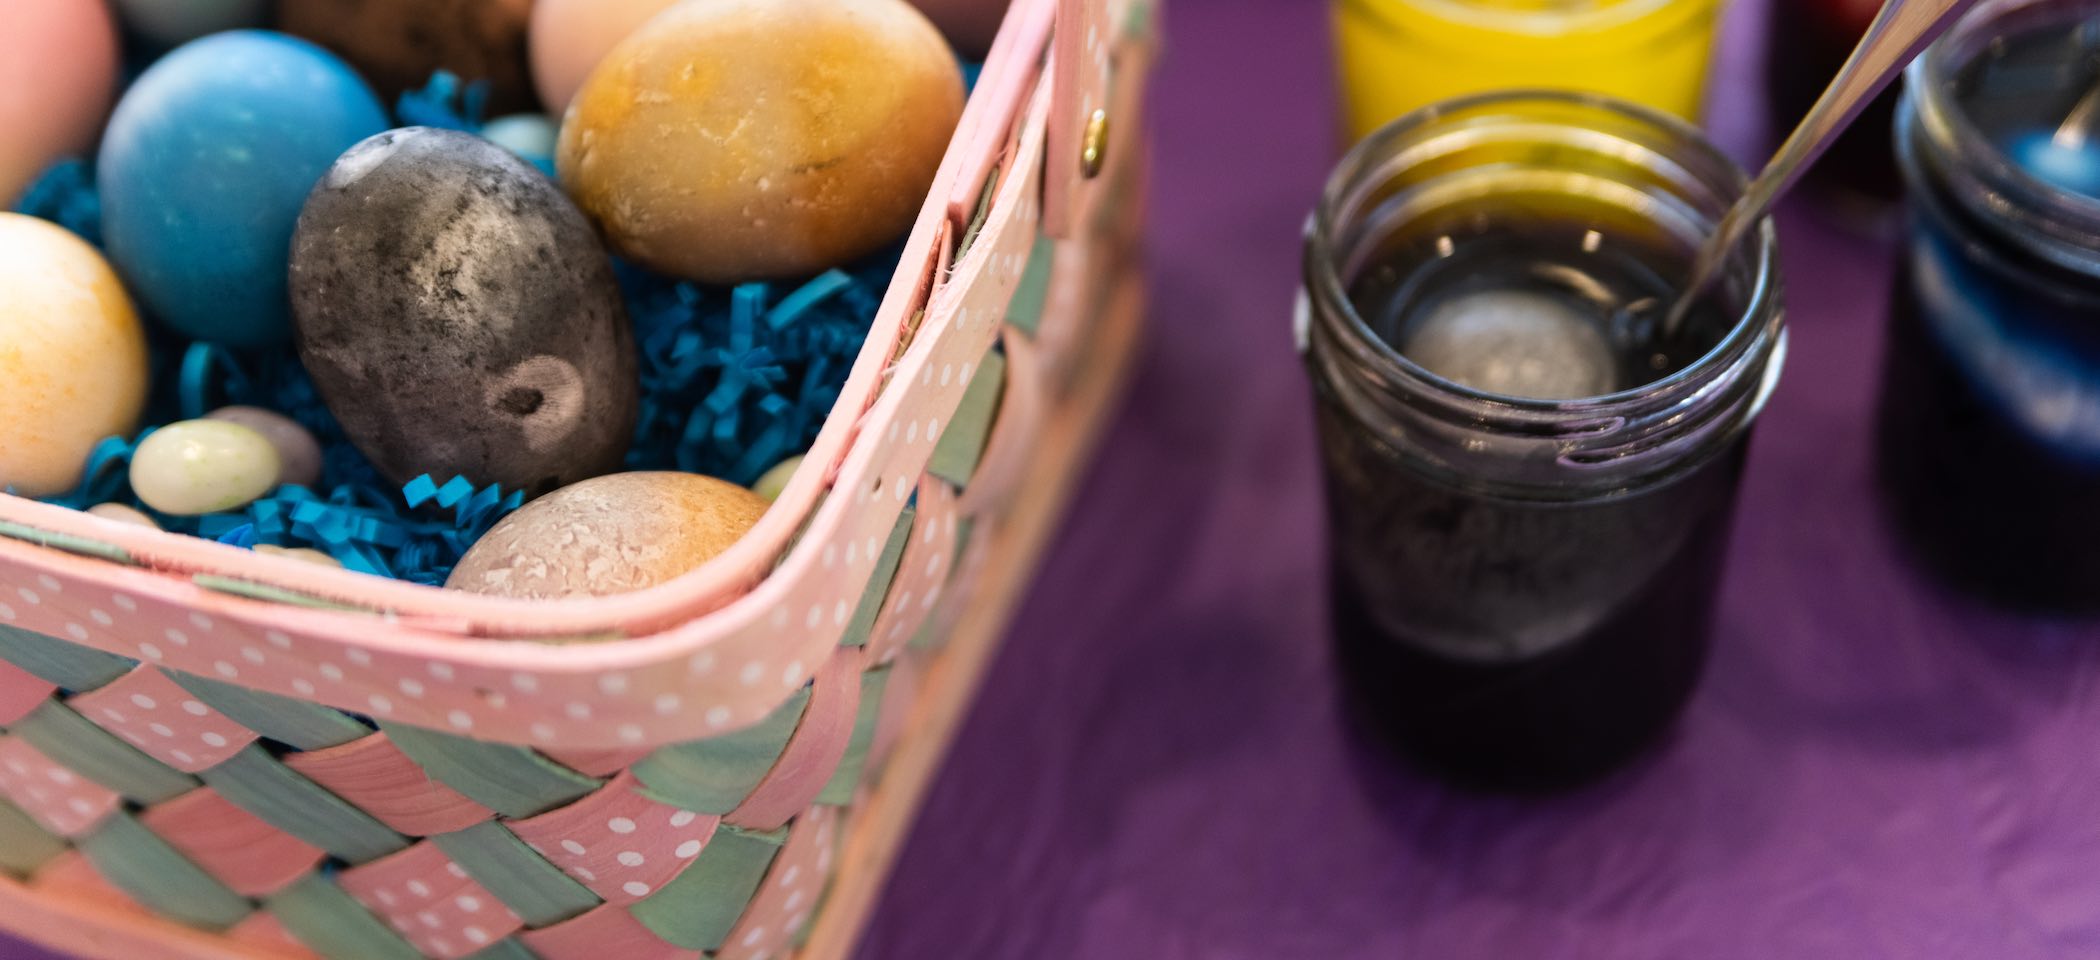 Want to Naturally Dye Your Easter Eggs?